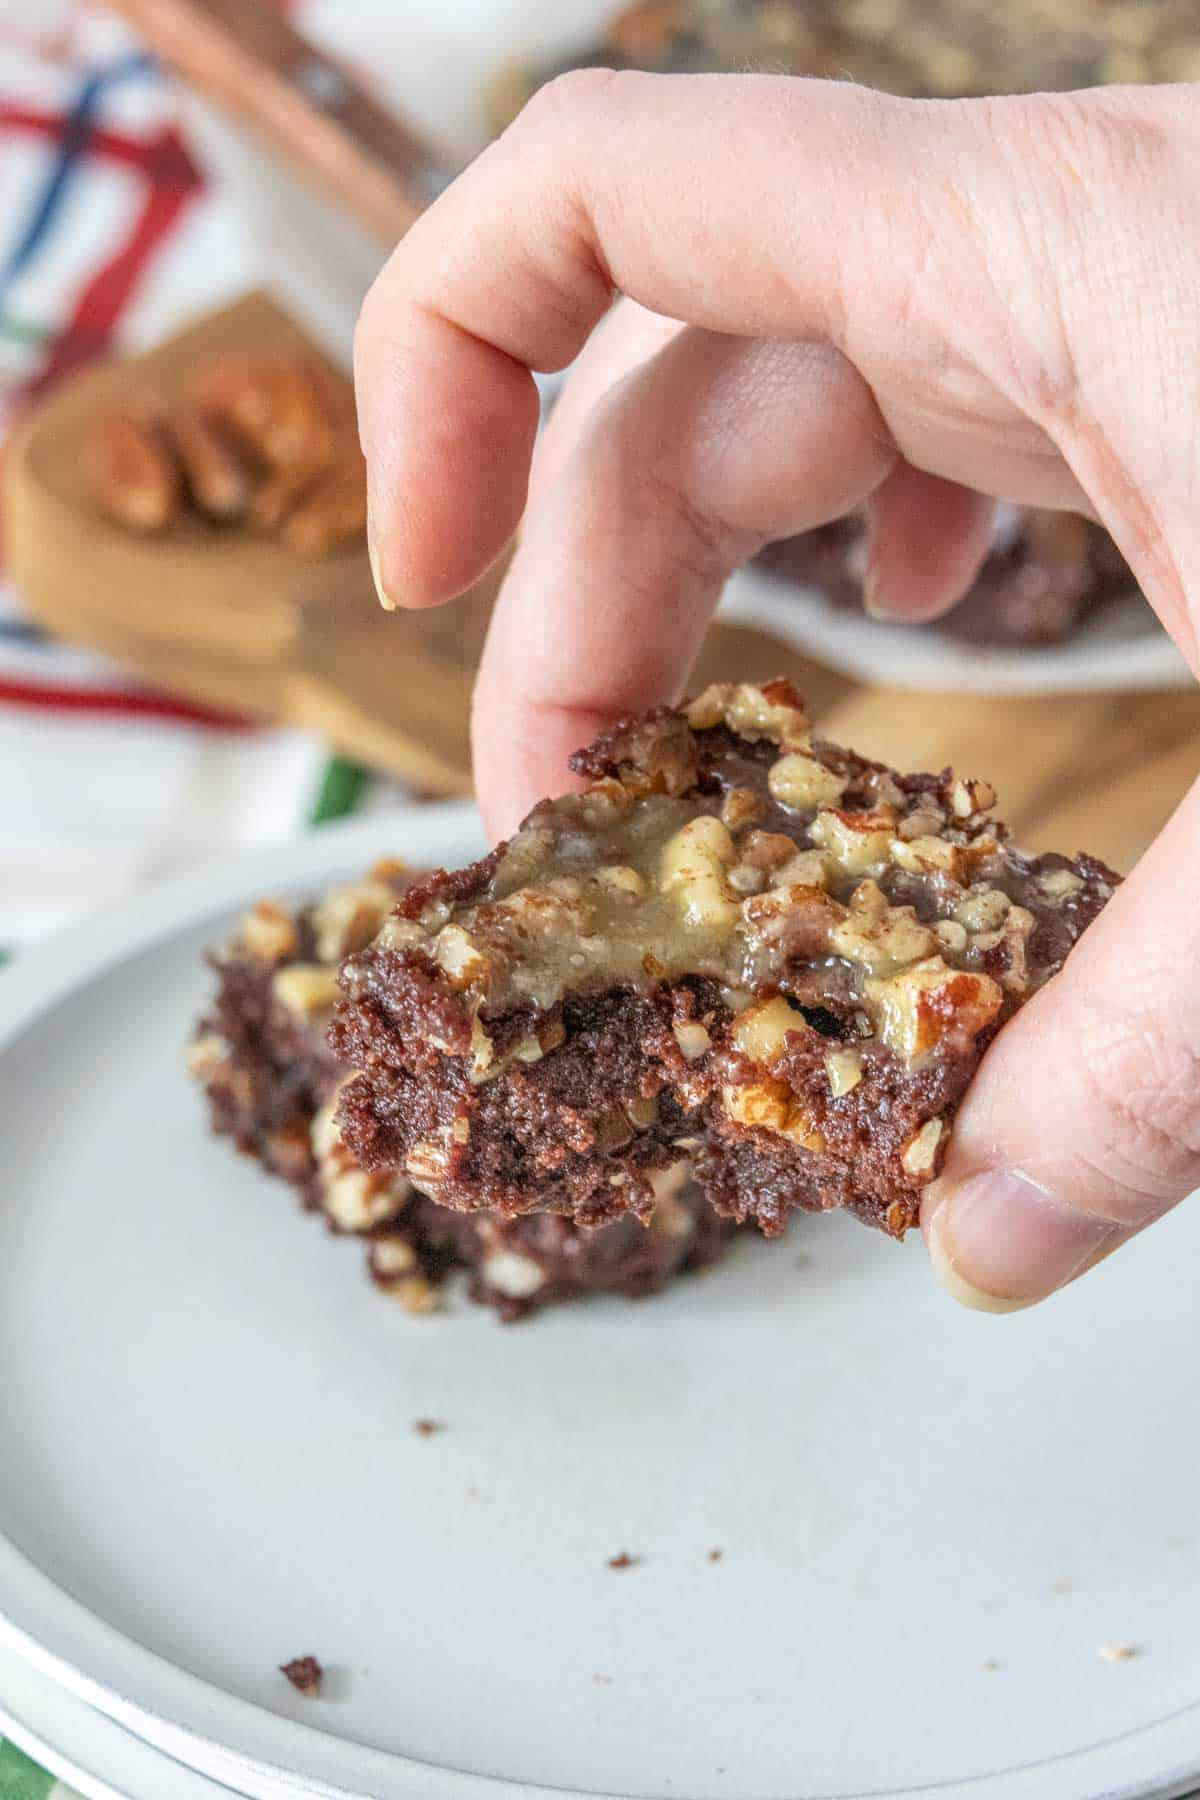 Caucasian hand holding a turtle brownie with a bite taken, showing fudgy interior.